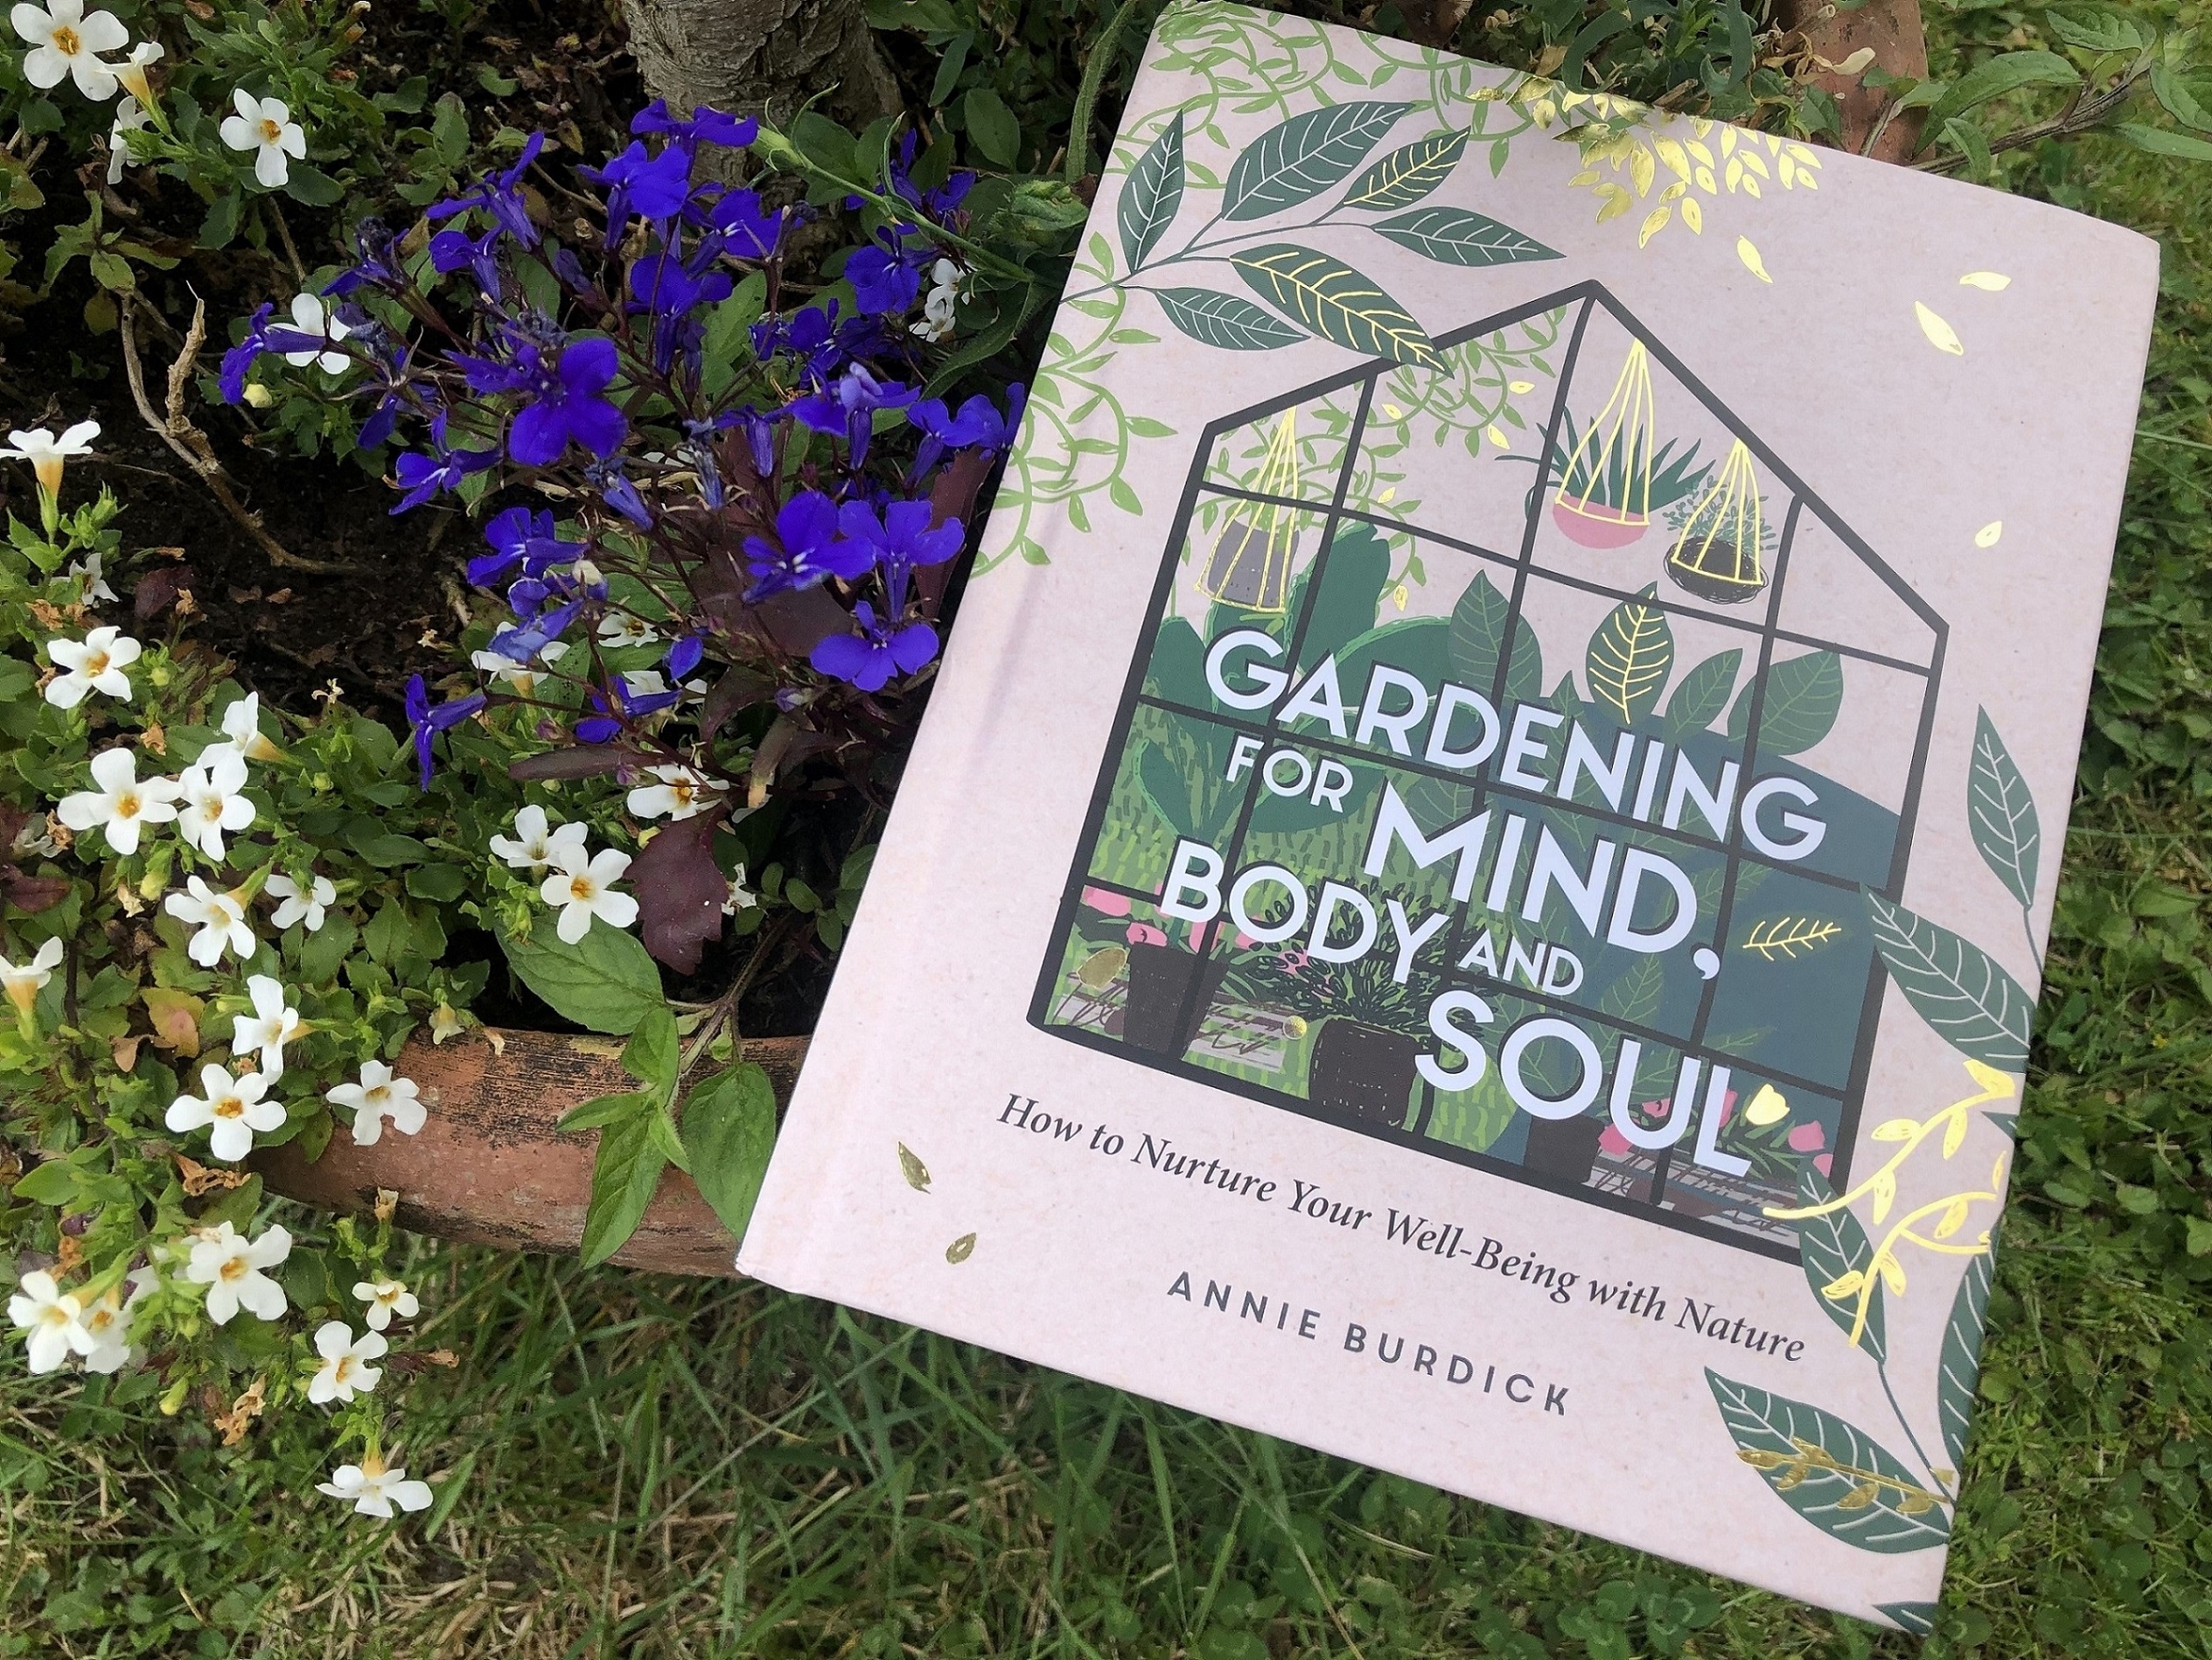 Win a hardback copy of Gardening for Mind, Body and Soul by Annie Burdick